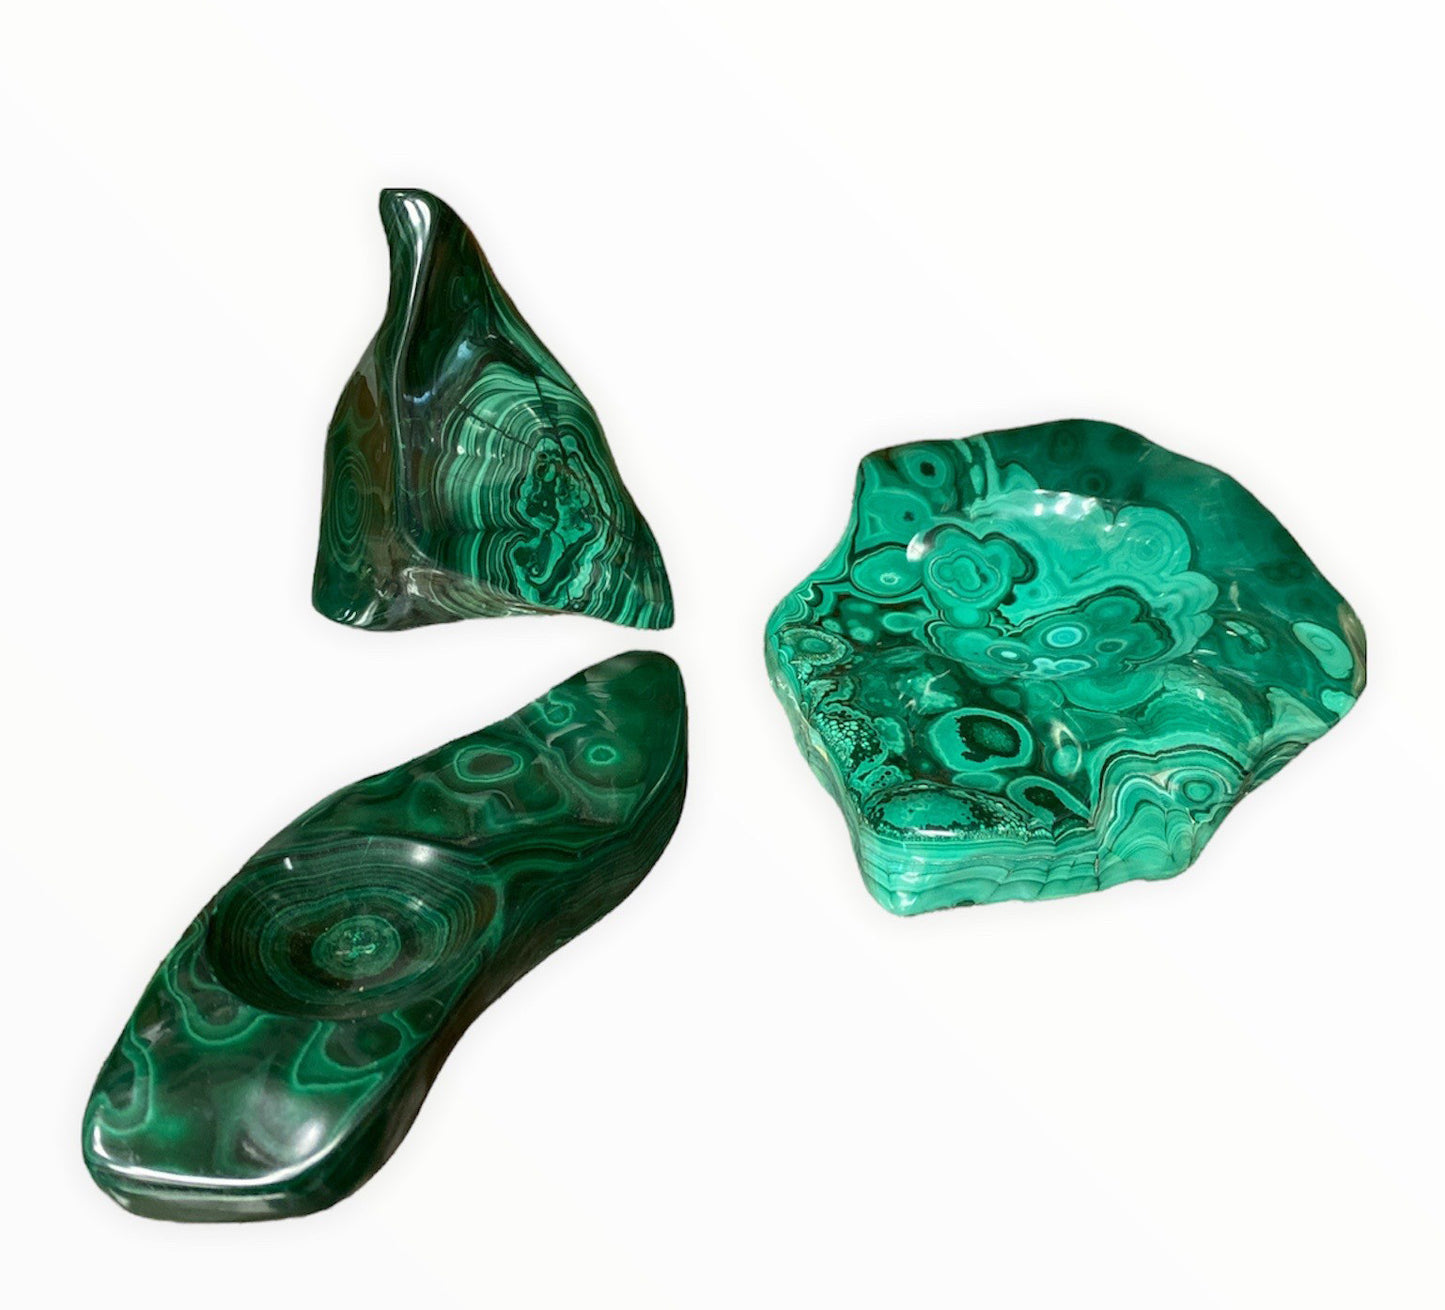 Malachite Free-form STONE Bowl DISH - 14-18cm - Sold by the gram - China - NEW622